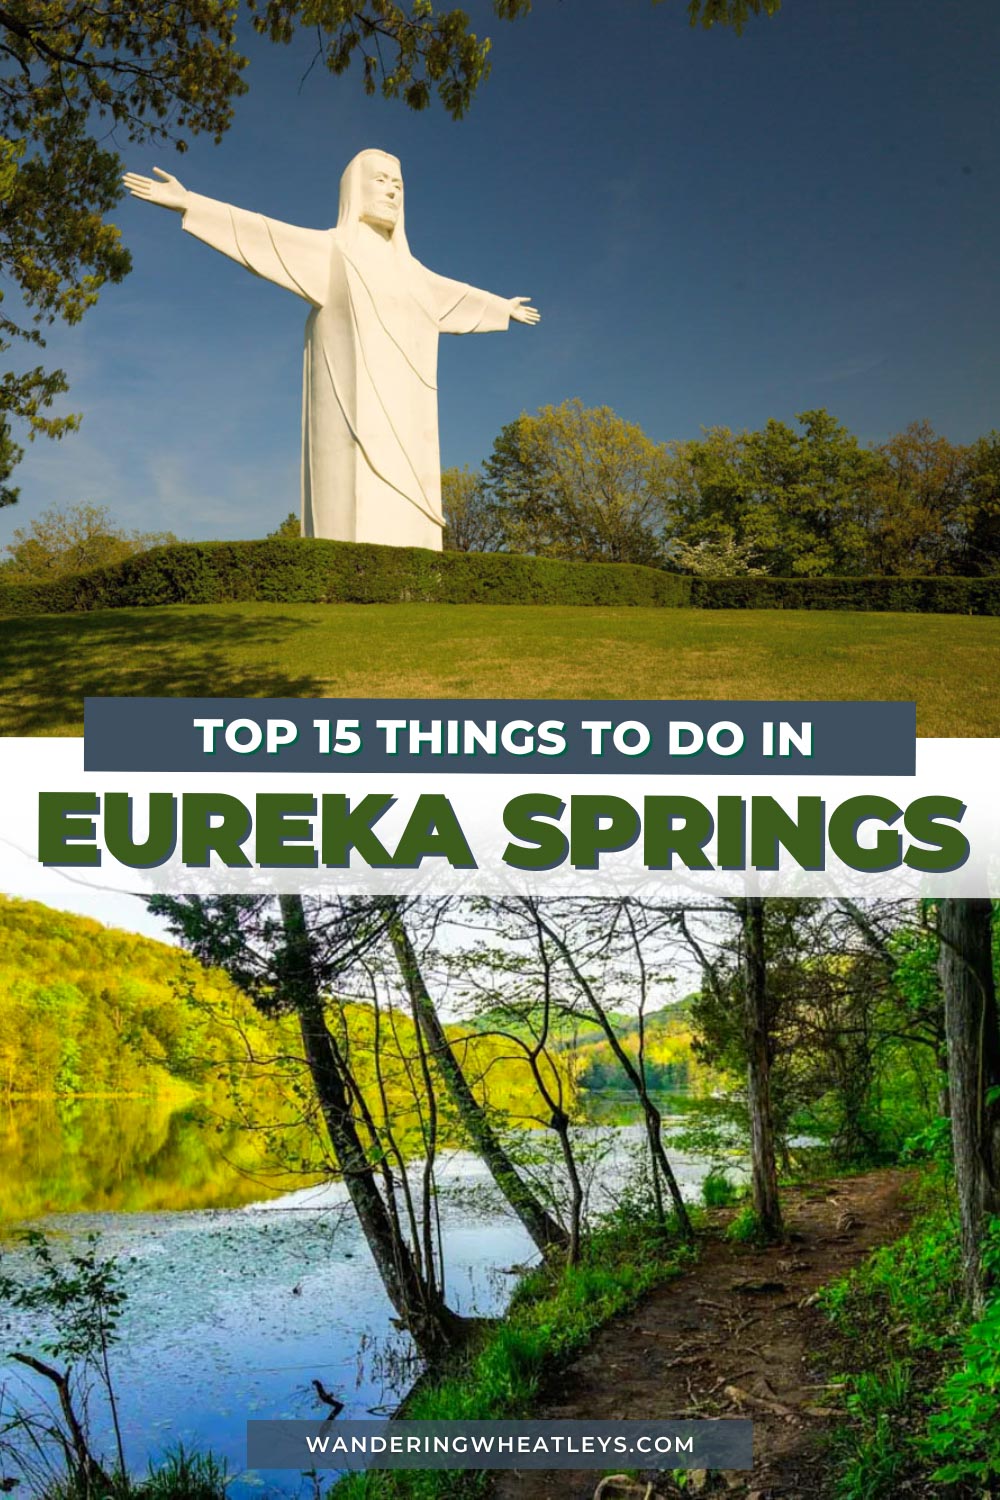 The Best Things to do in Eureka Springs.